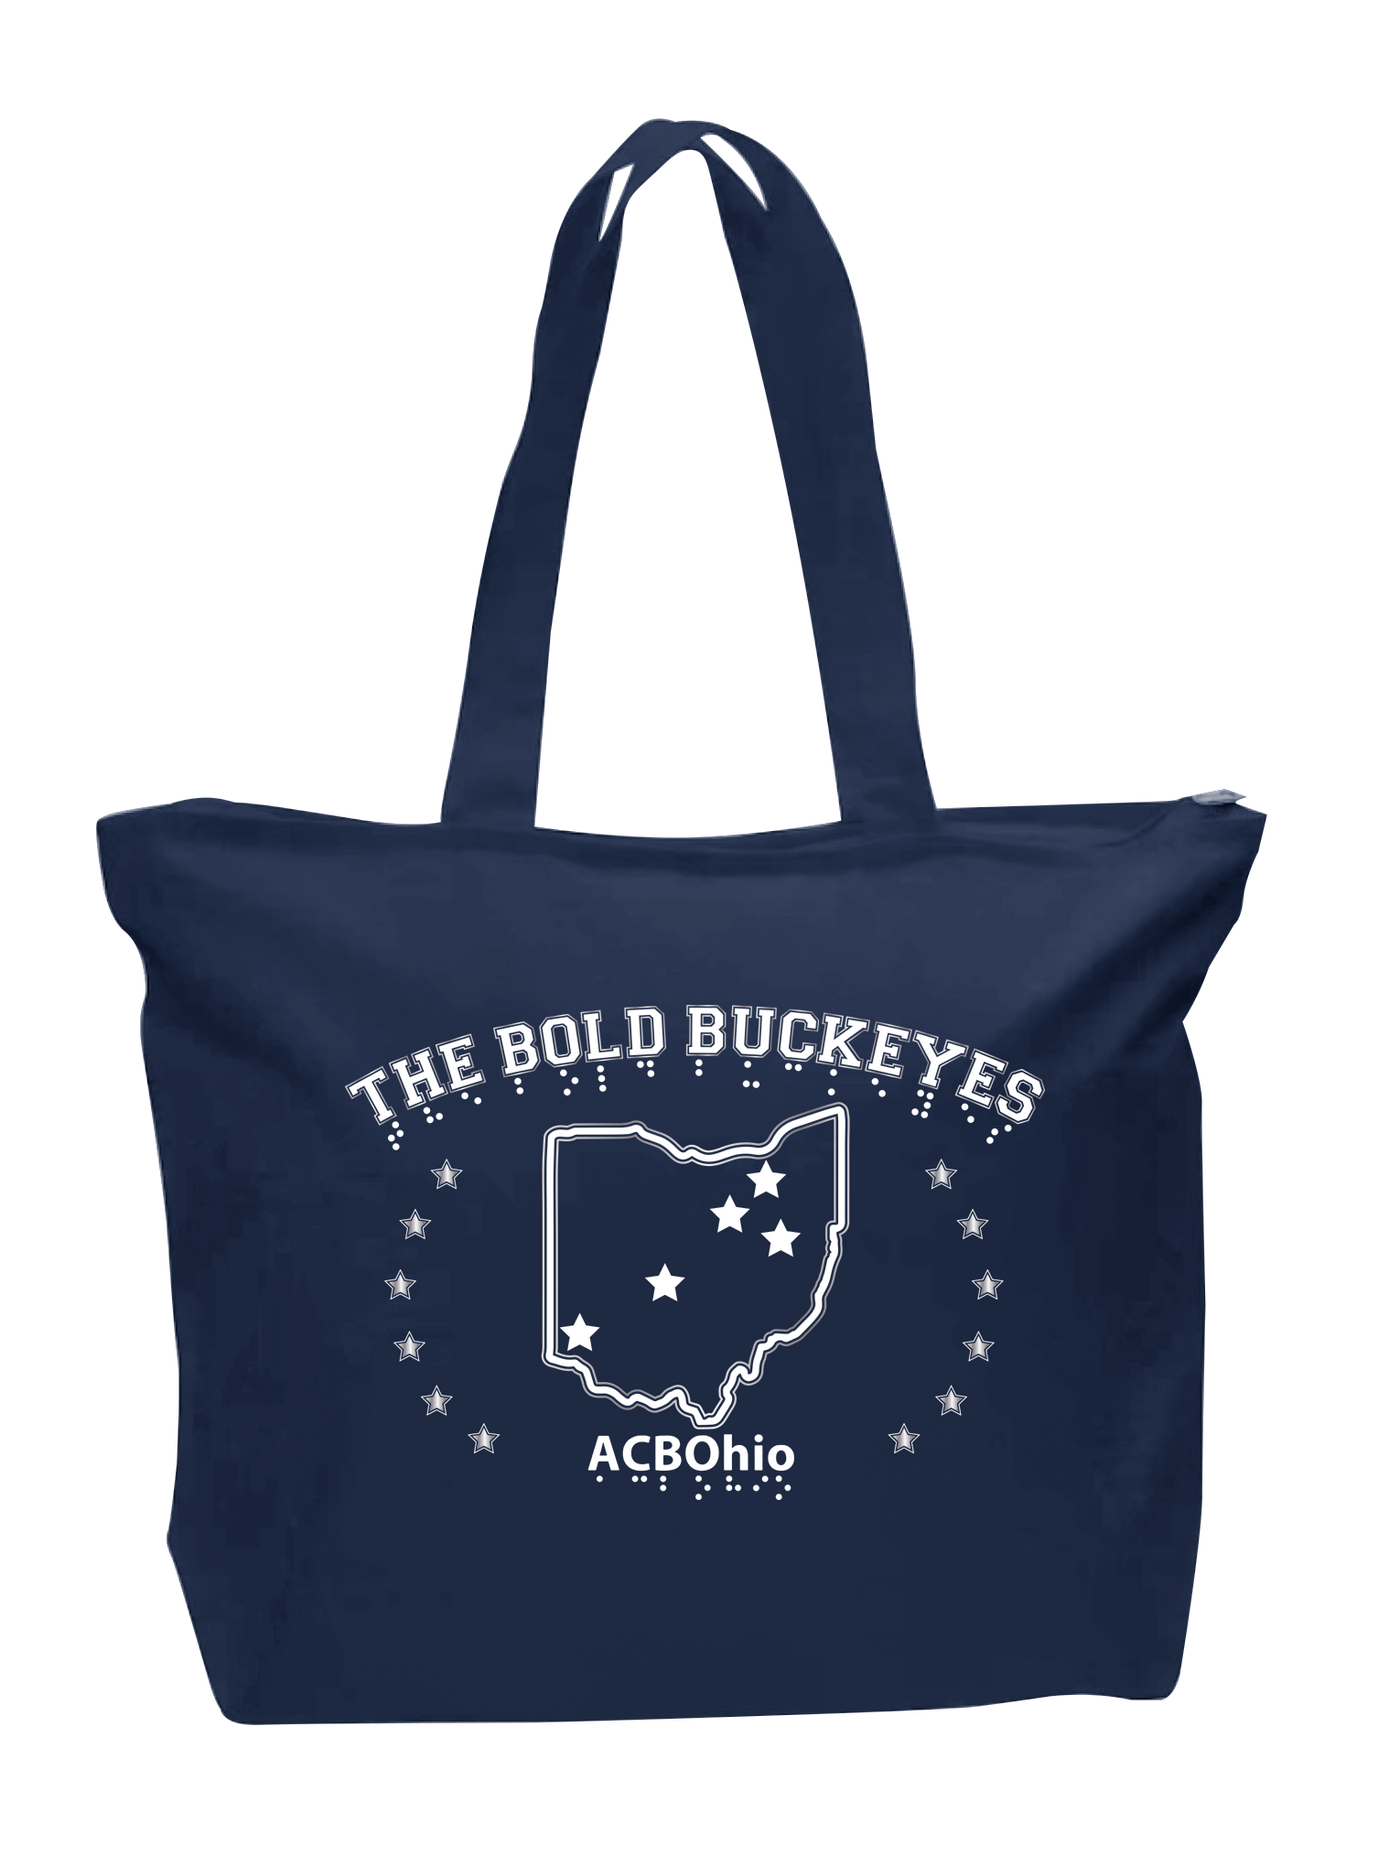 This tote is 15 by 18 canvas bag. There is a fold in the bottom of the bag so that the bag can sit upright. It has a full zip across the top as well as a zippered pocket inside. The print features the outline of the state of Ohio with six stars in a half circle on either side. There are five stars within the state outline marking cities within Ohio. Above the stars and state outline reads THE BOLD BUCKEYES with braille under each letter. Under the state and stars is ACB OHIO with braille under each letter.